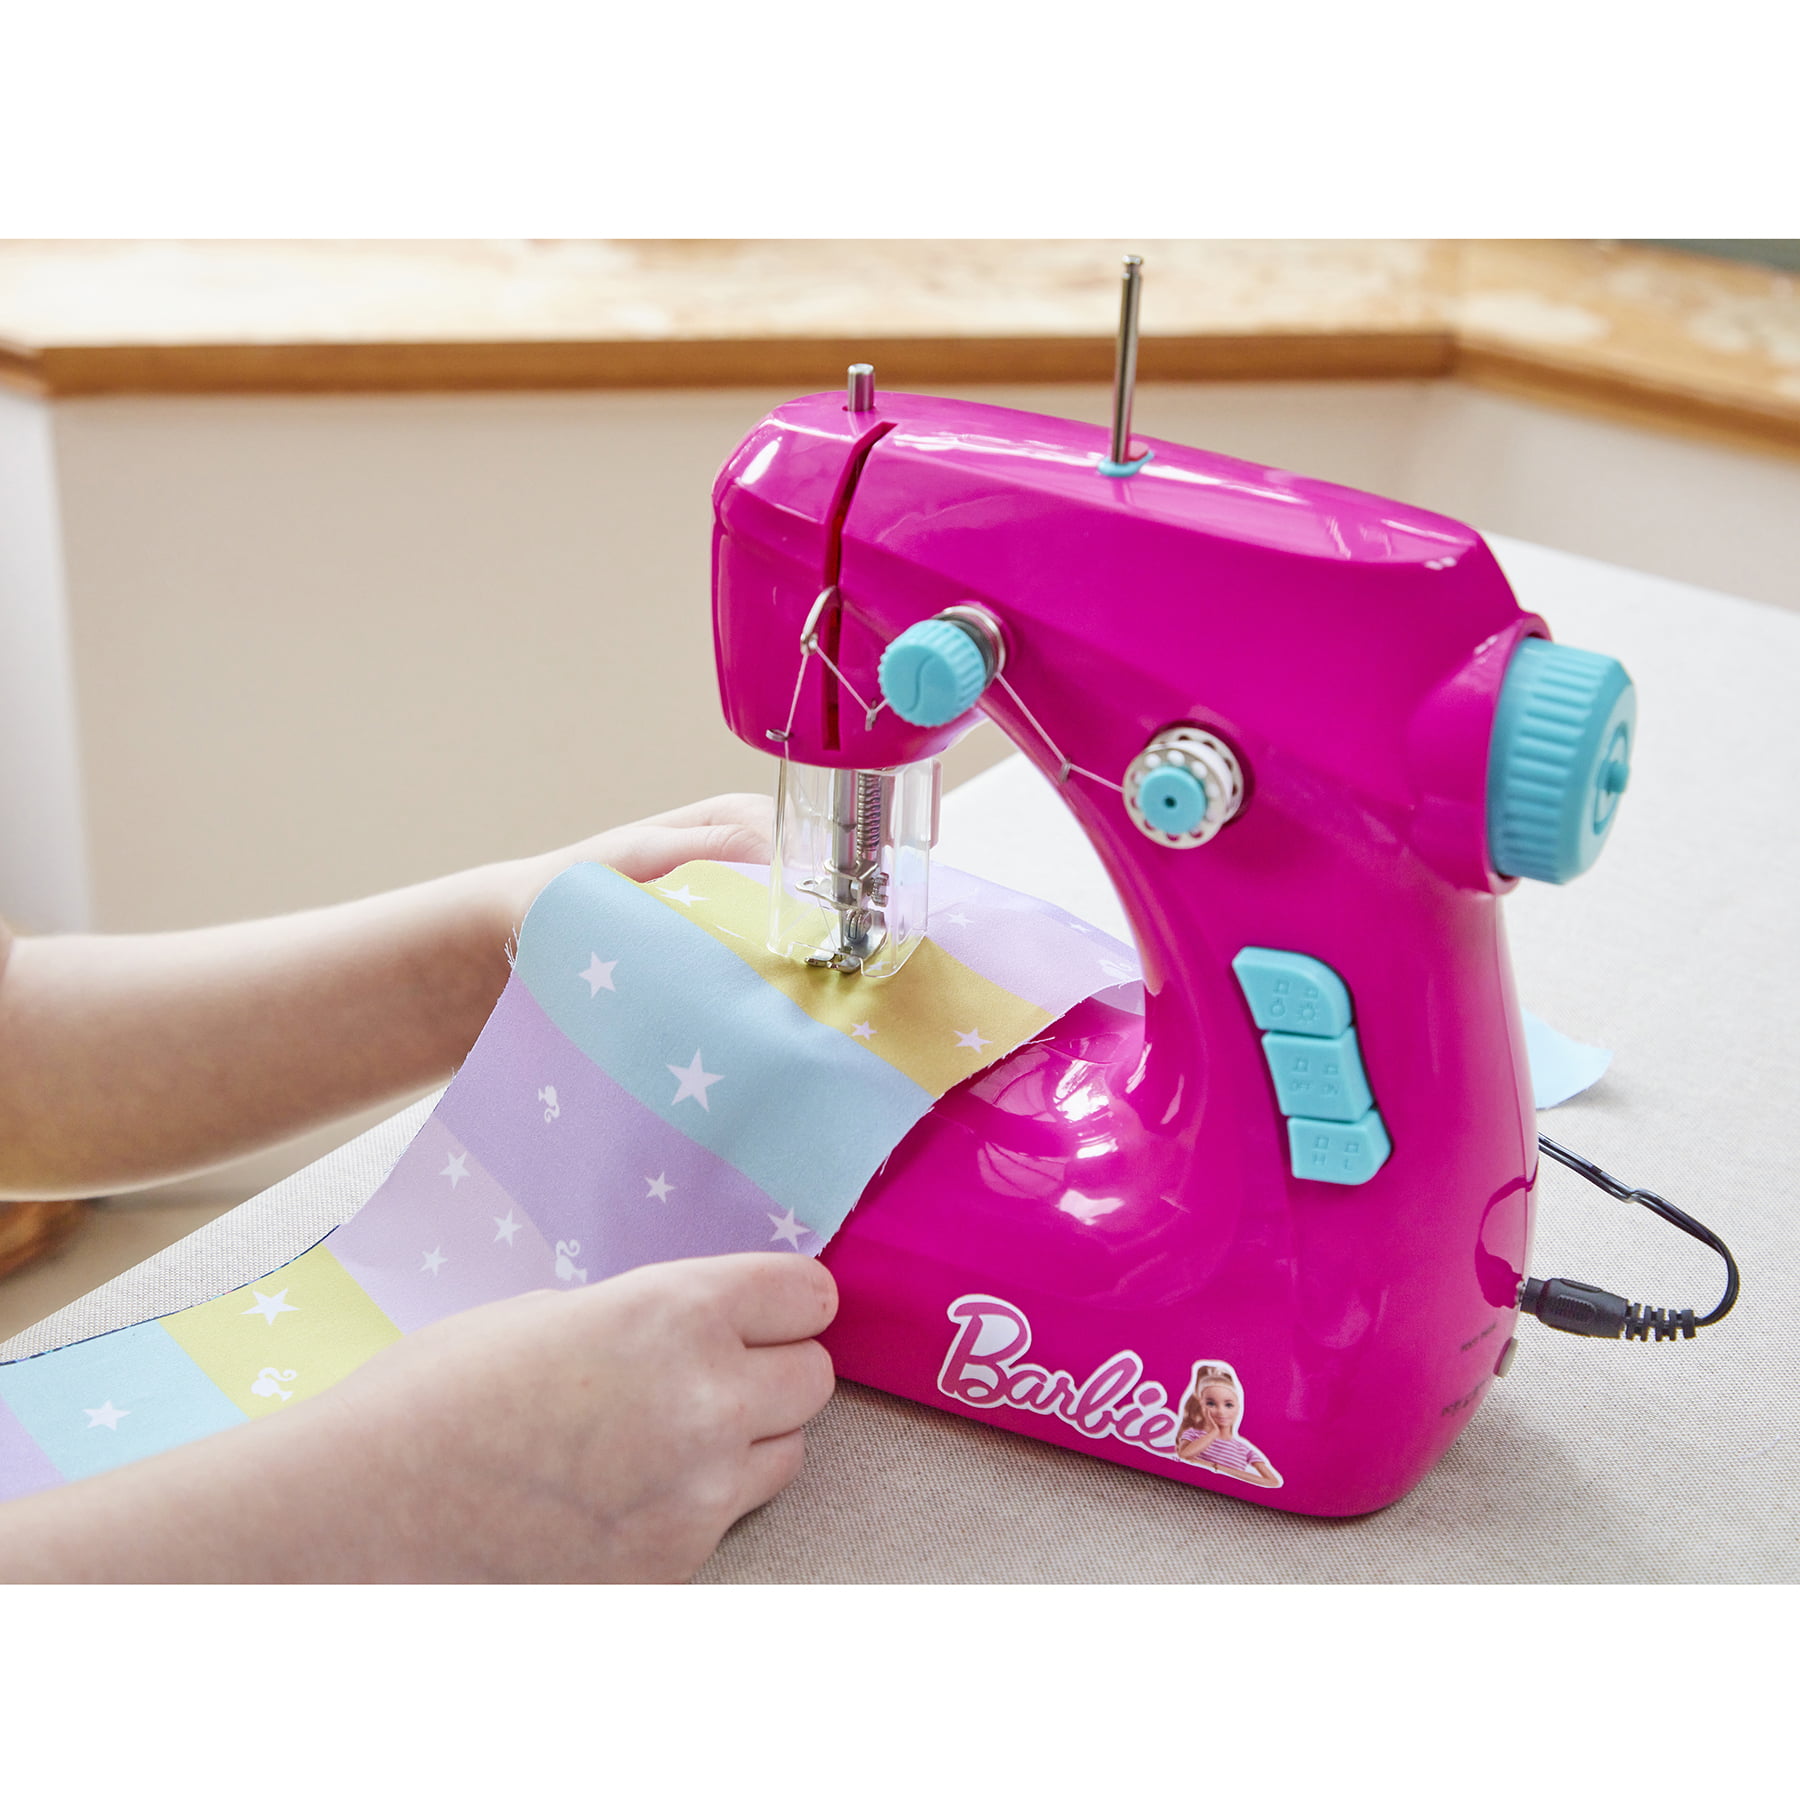 Barbie Sewing Machine with Doll PER ORDER 